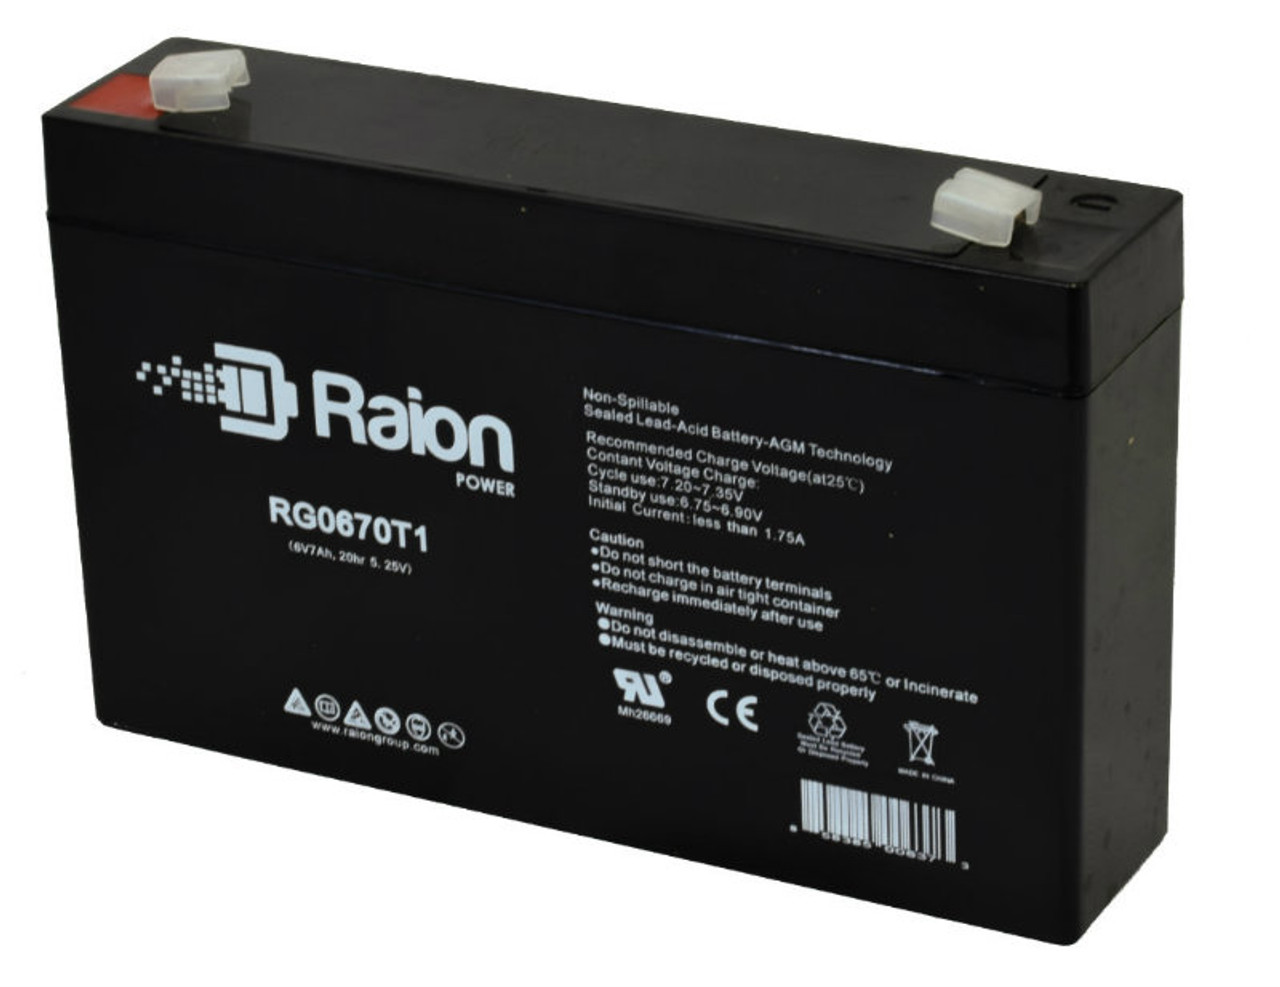 Raion Power RG0670T1 6V 7Ah Replacement Battery Cartridge for Philips Pagewriter ECG1721A-1700 Series XLI medical equipment